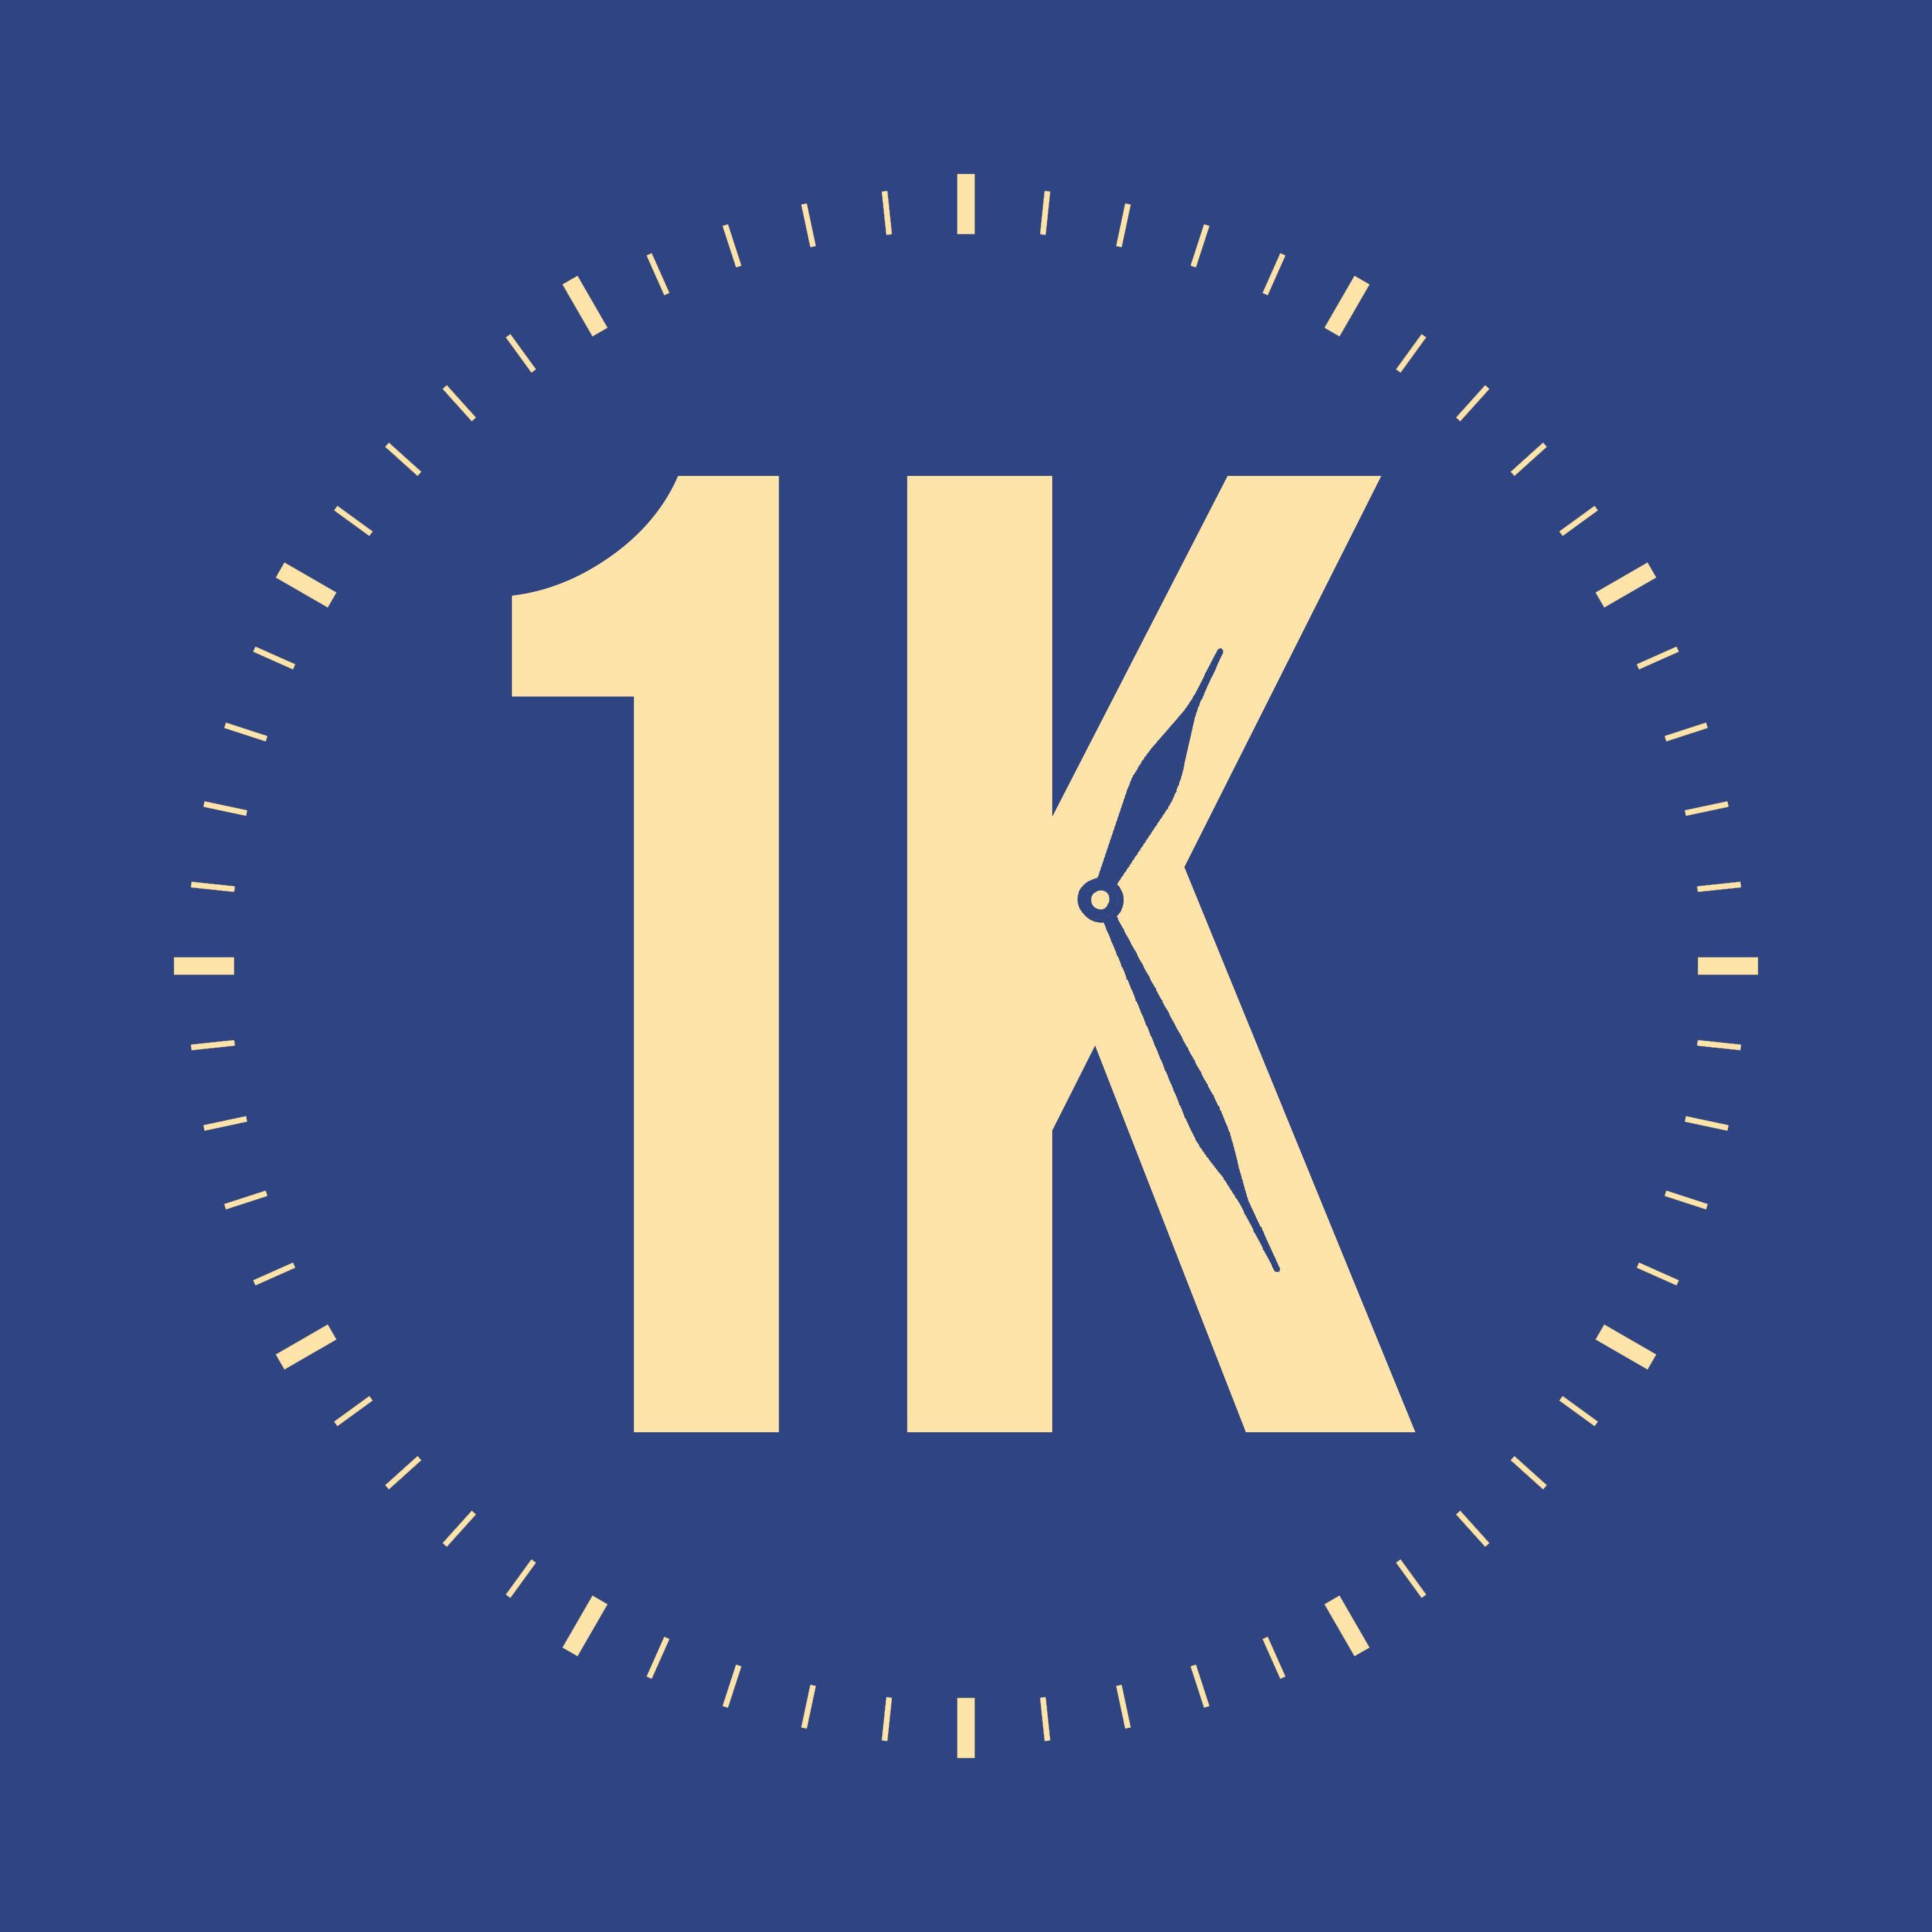 1K Logo - 1K: The 000 Second Interview Podcast on Apple Podcasts